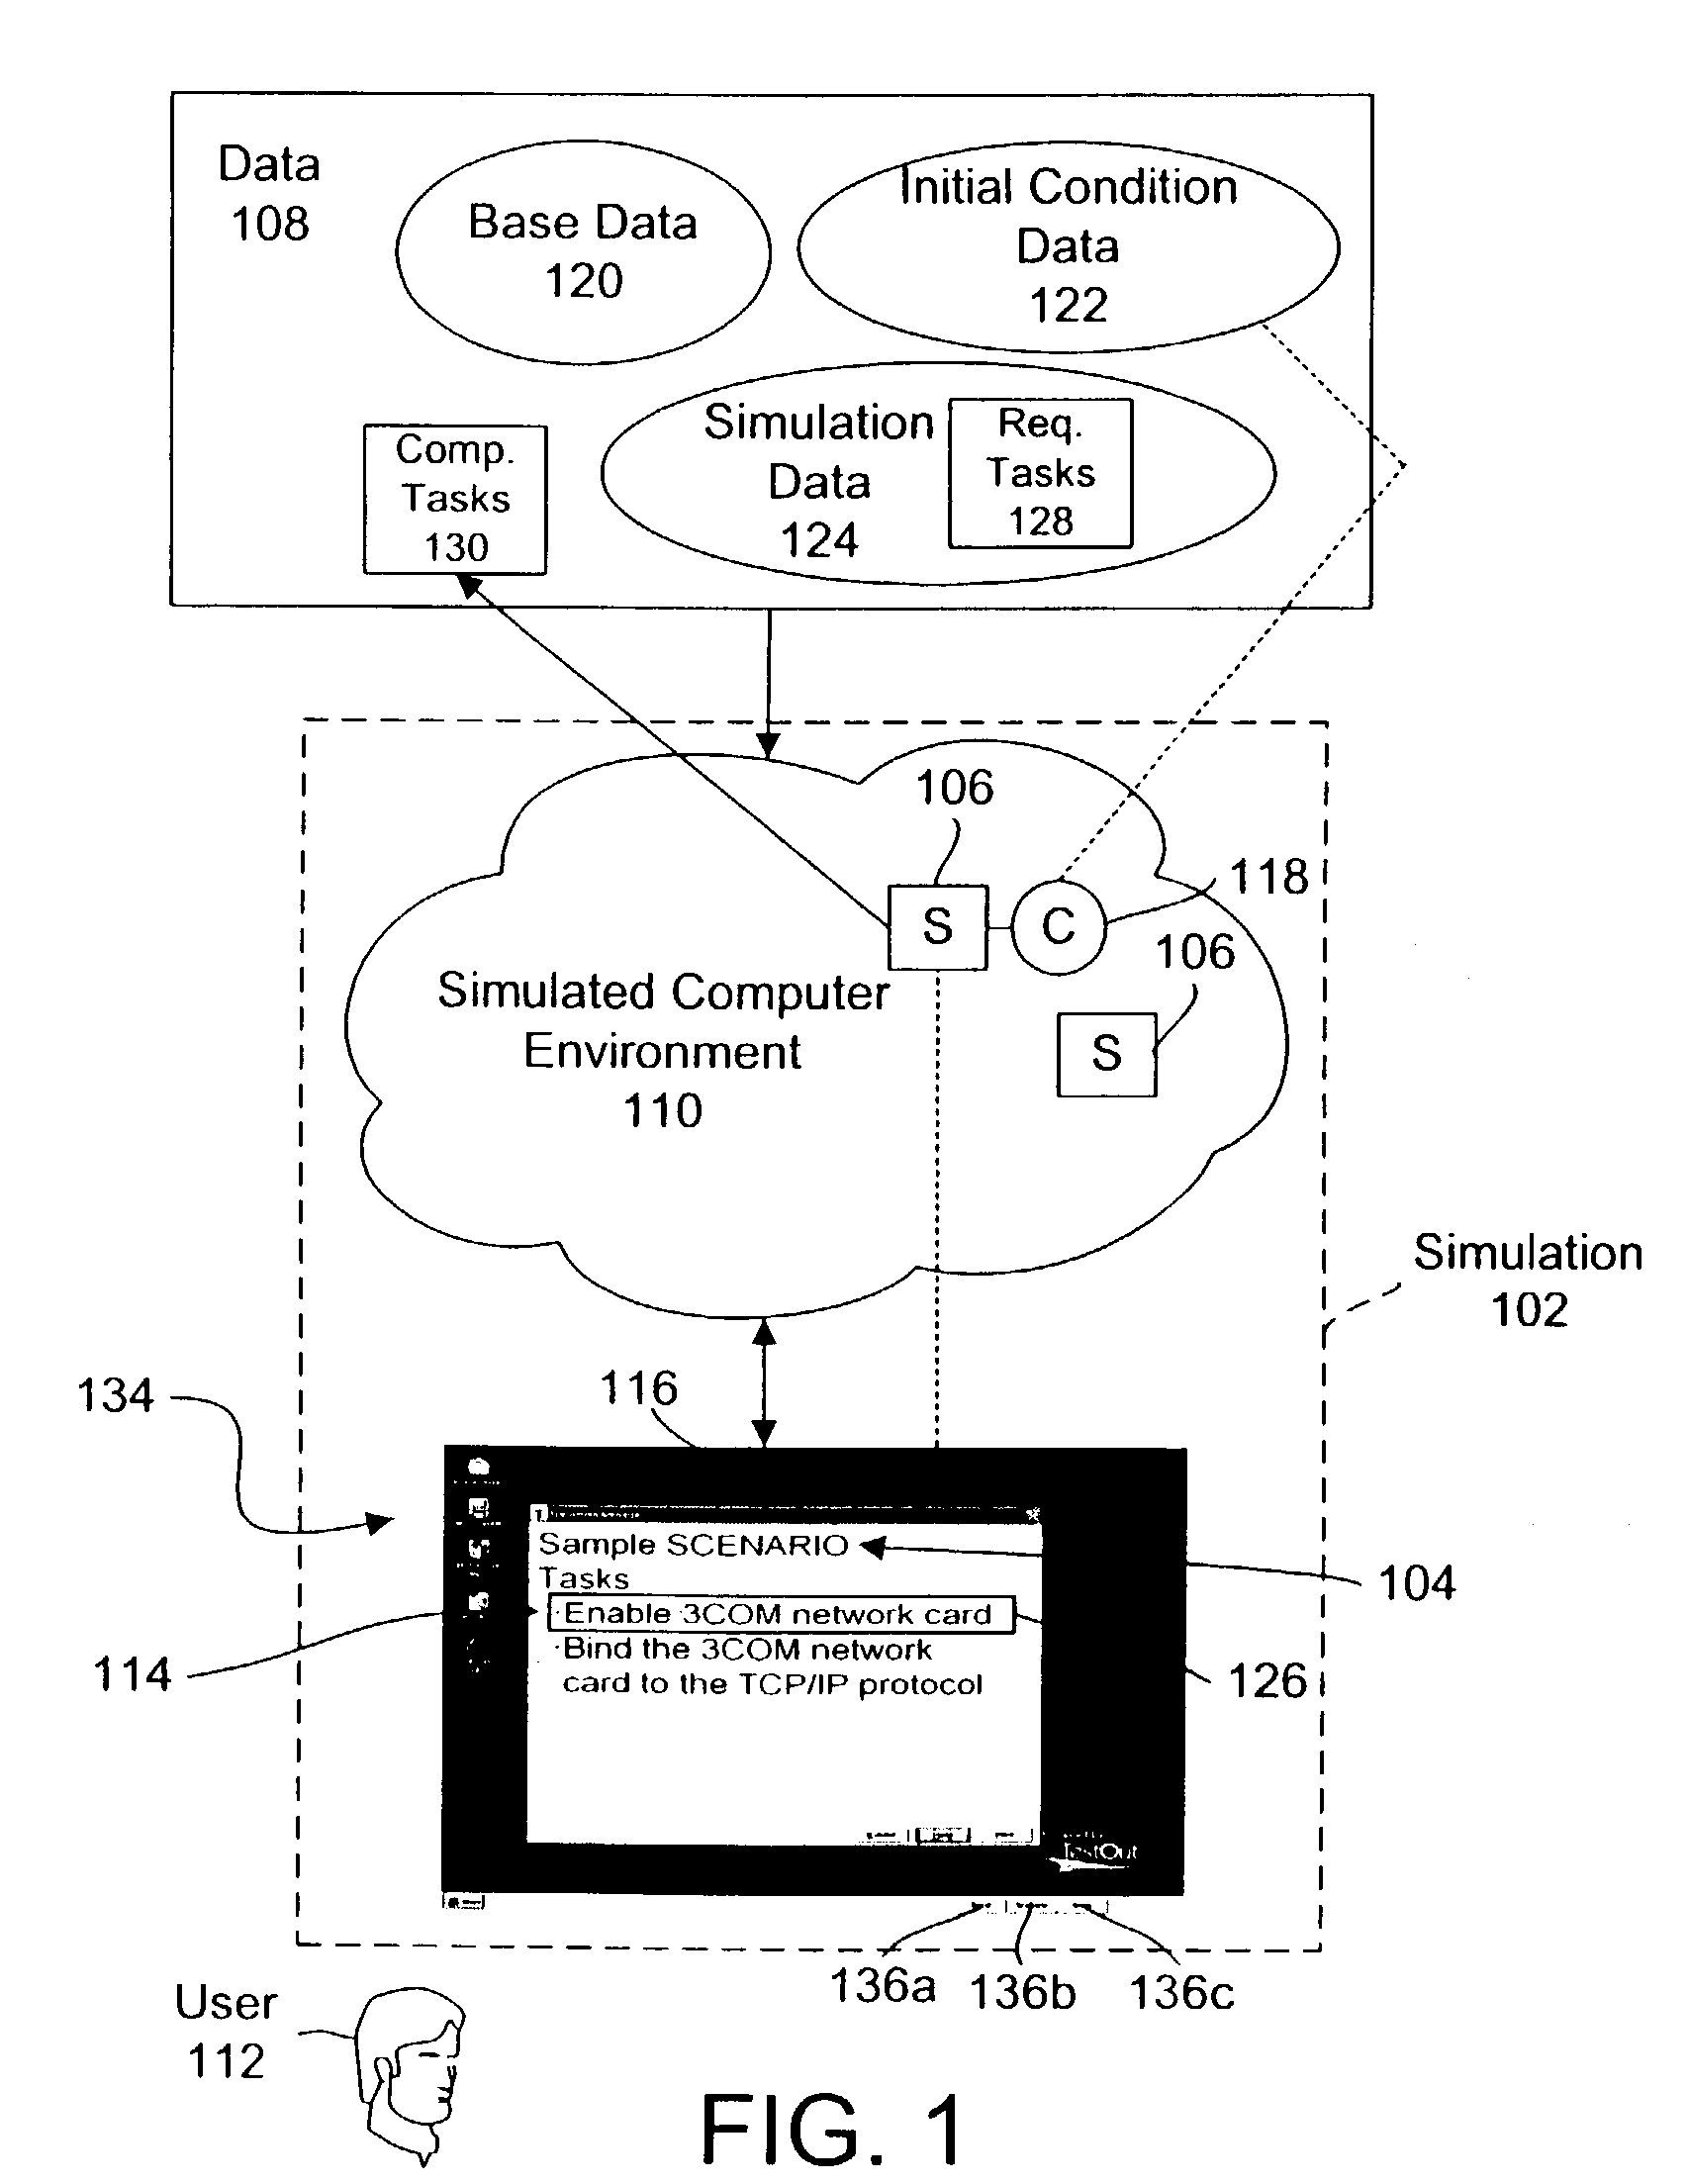 System and method for simulating a computer environment and evaluating a user's performance within a simulation